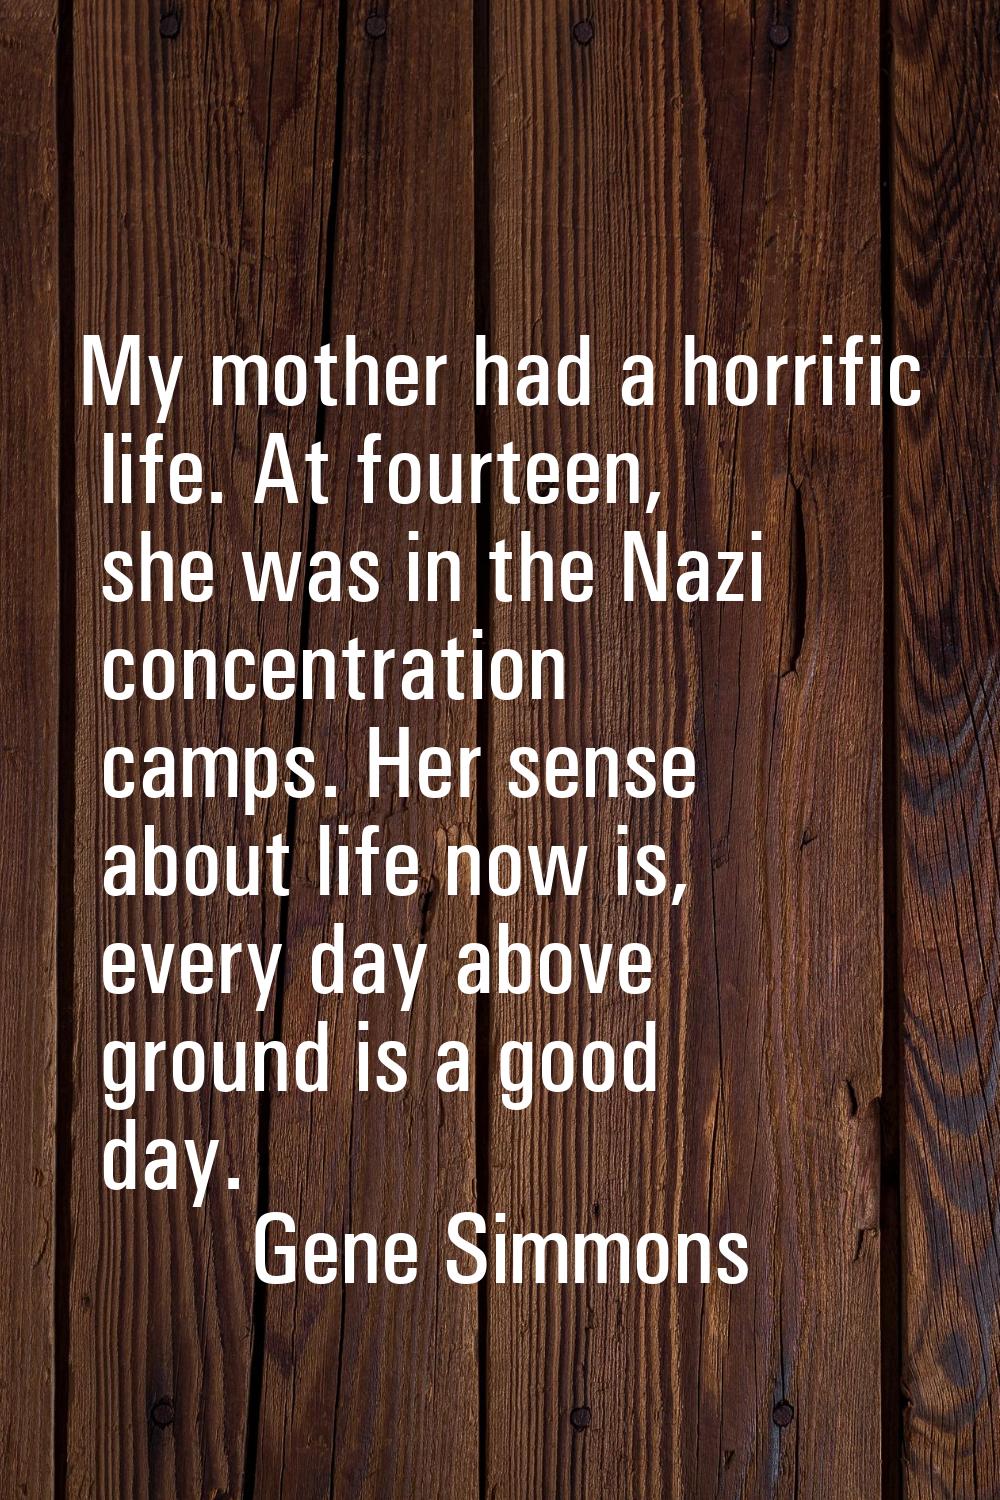 My mother had a horrific life. At fourteen, she was in the Nazi concentration camps. Her sense abou